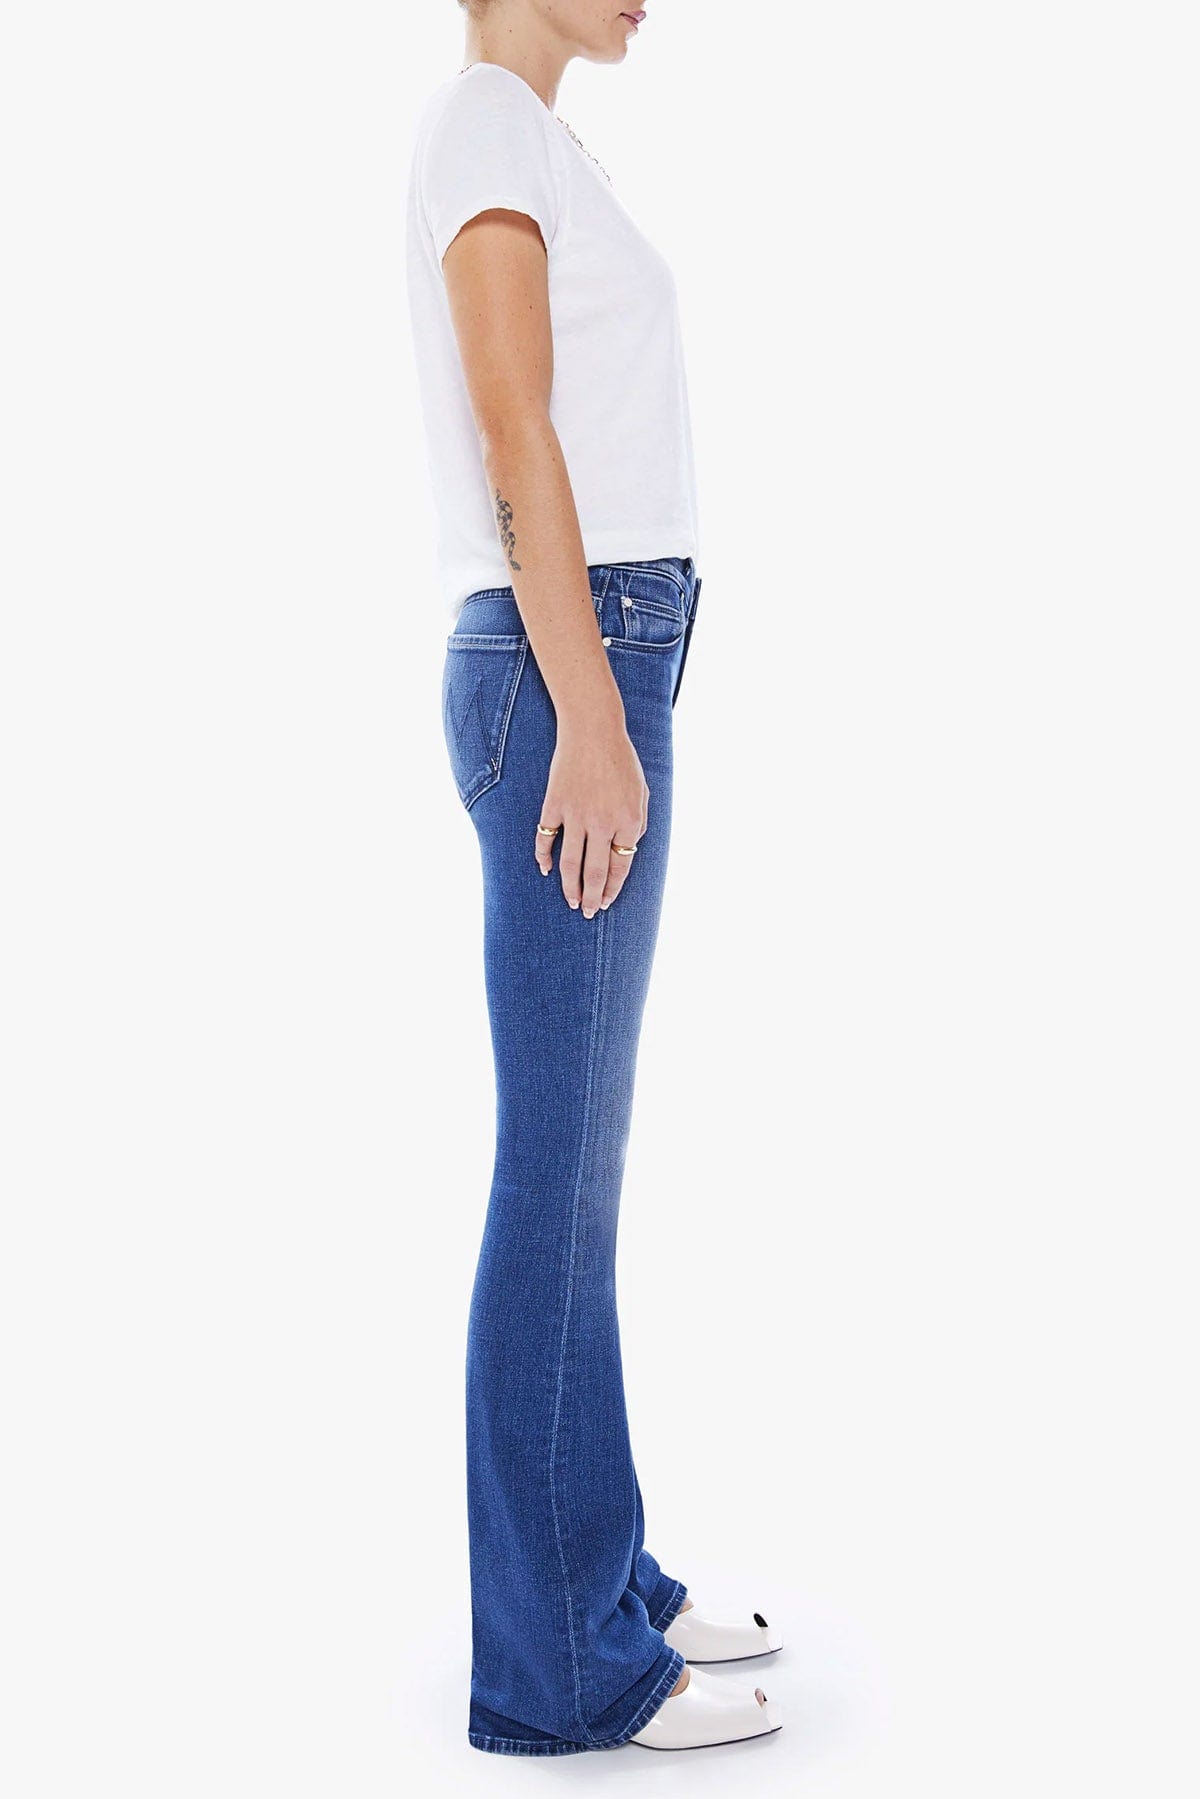 MOTHER PANTALONE IN DENIM  BLUE JEANS / 23 Jeans Donna Mother The Down Low Weekender Heel